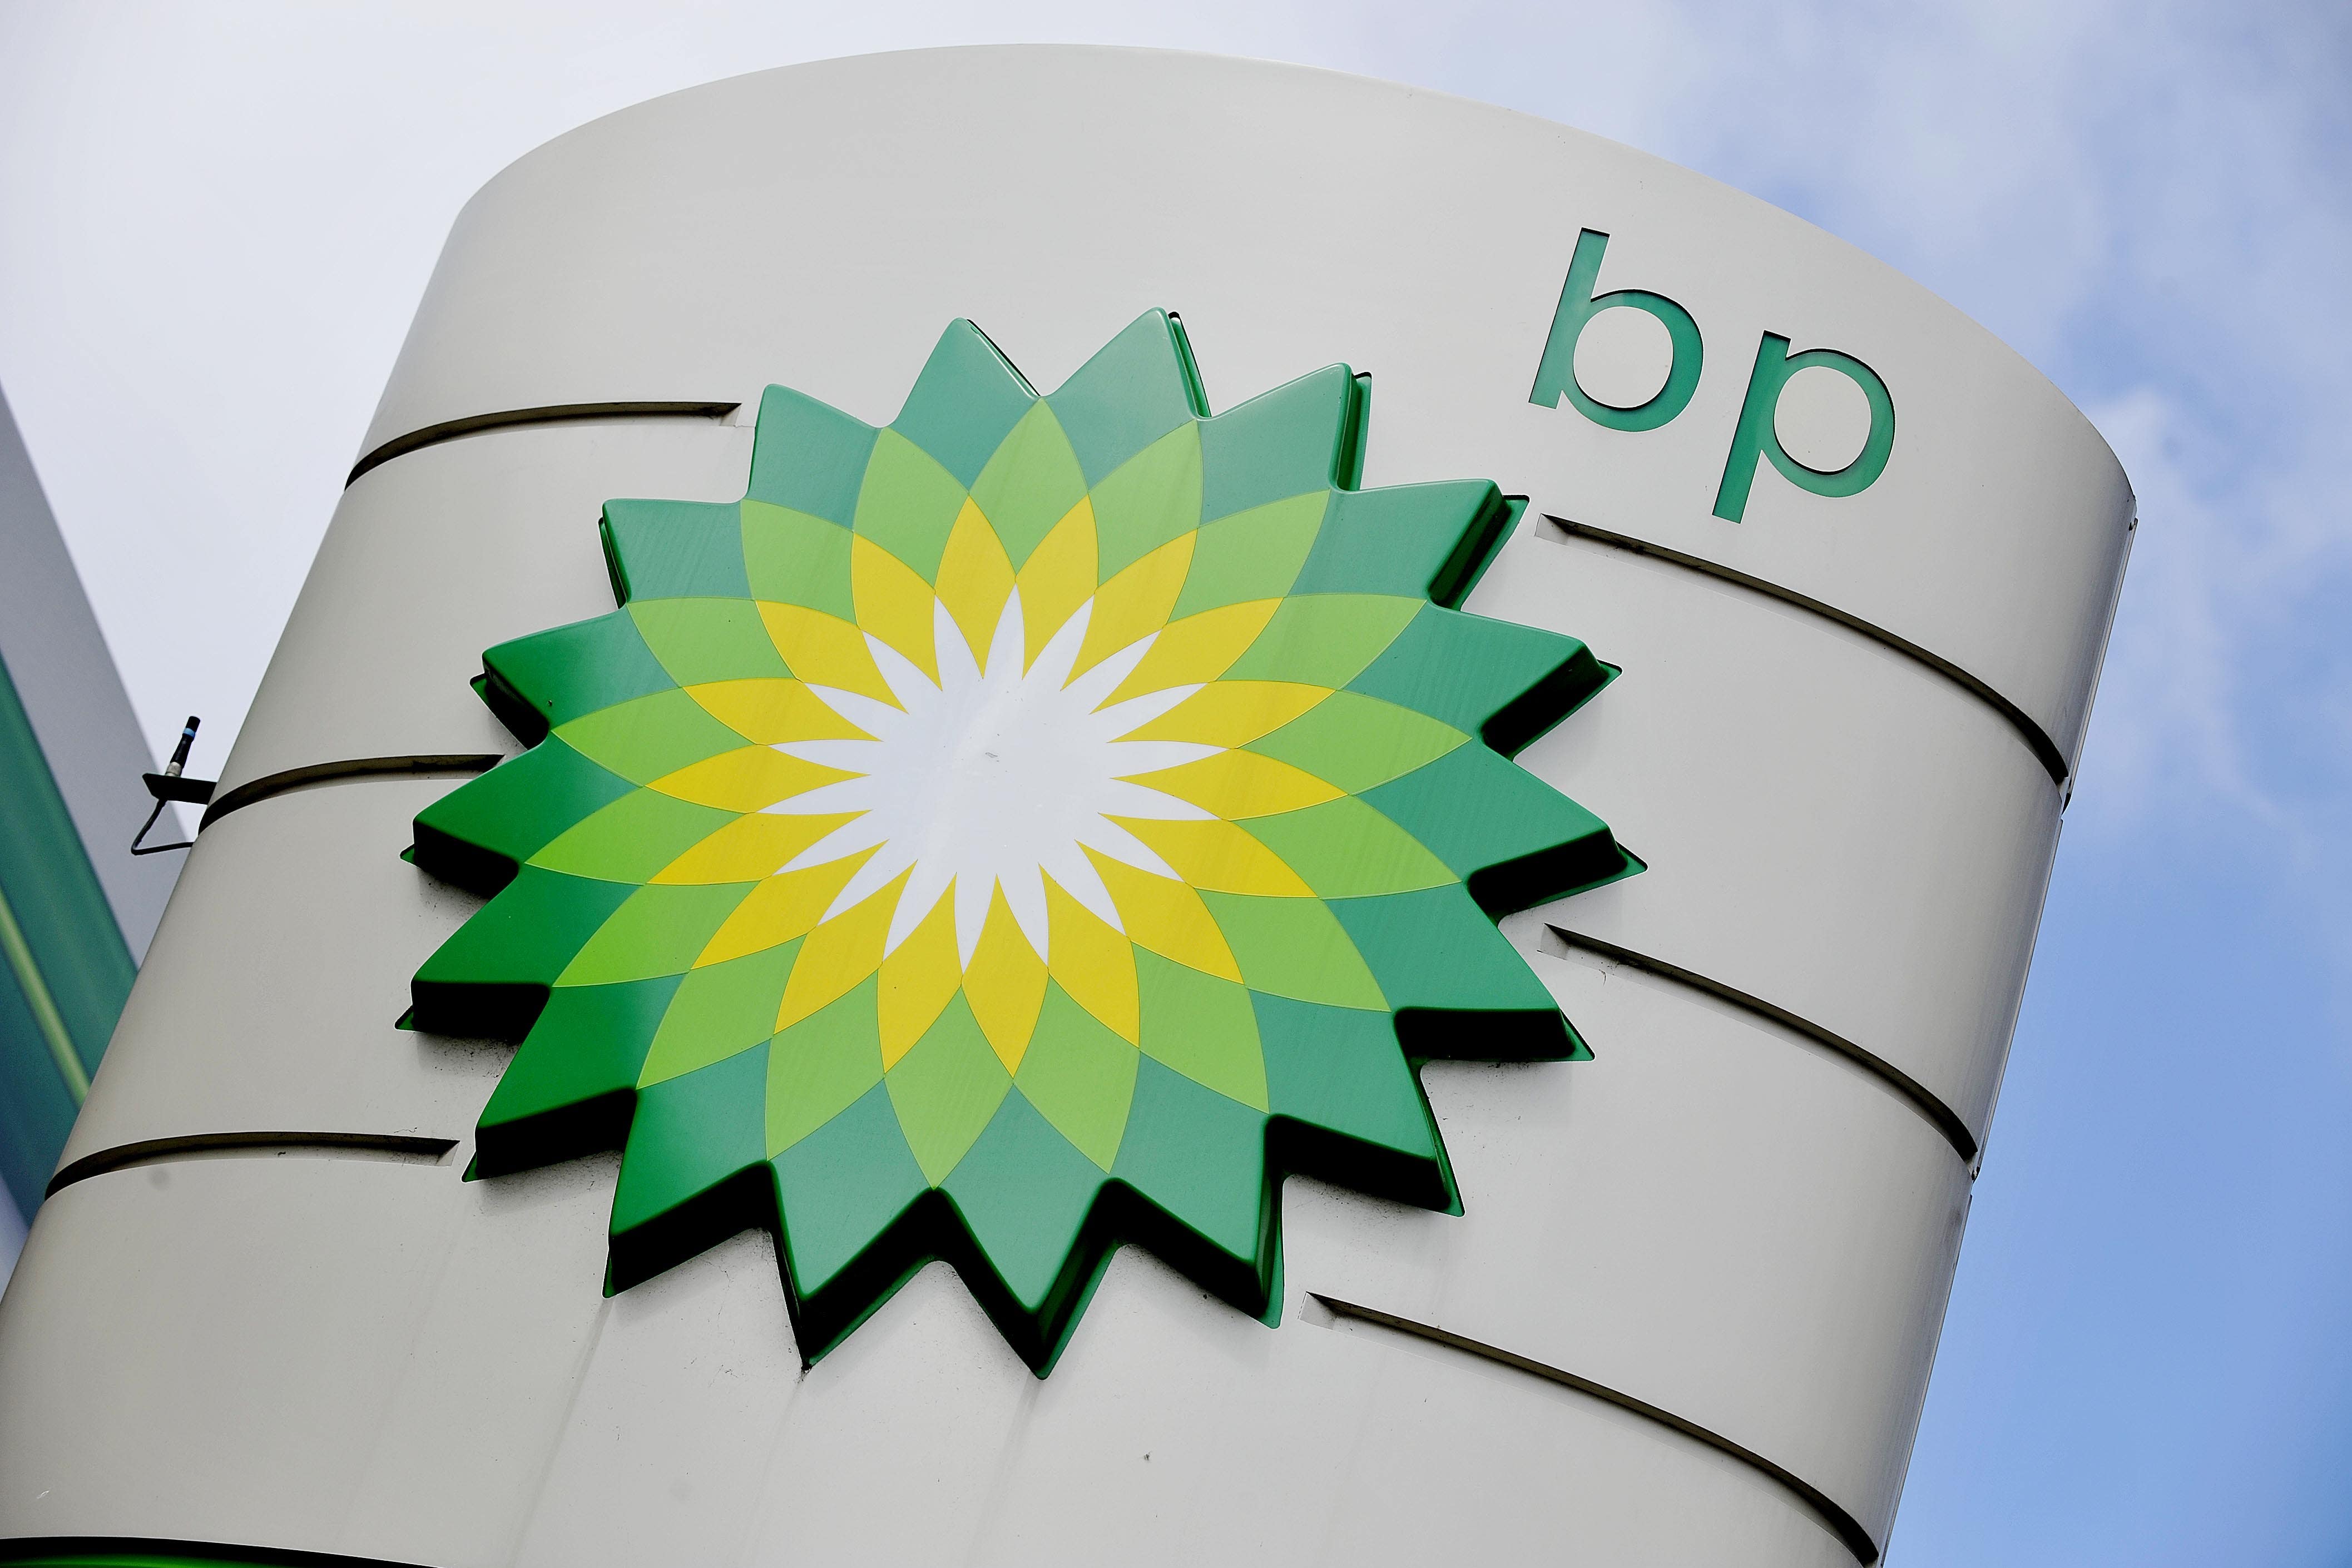 BP is one of the UK’s largest oil explorers